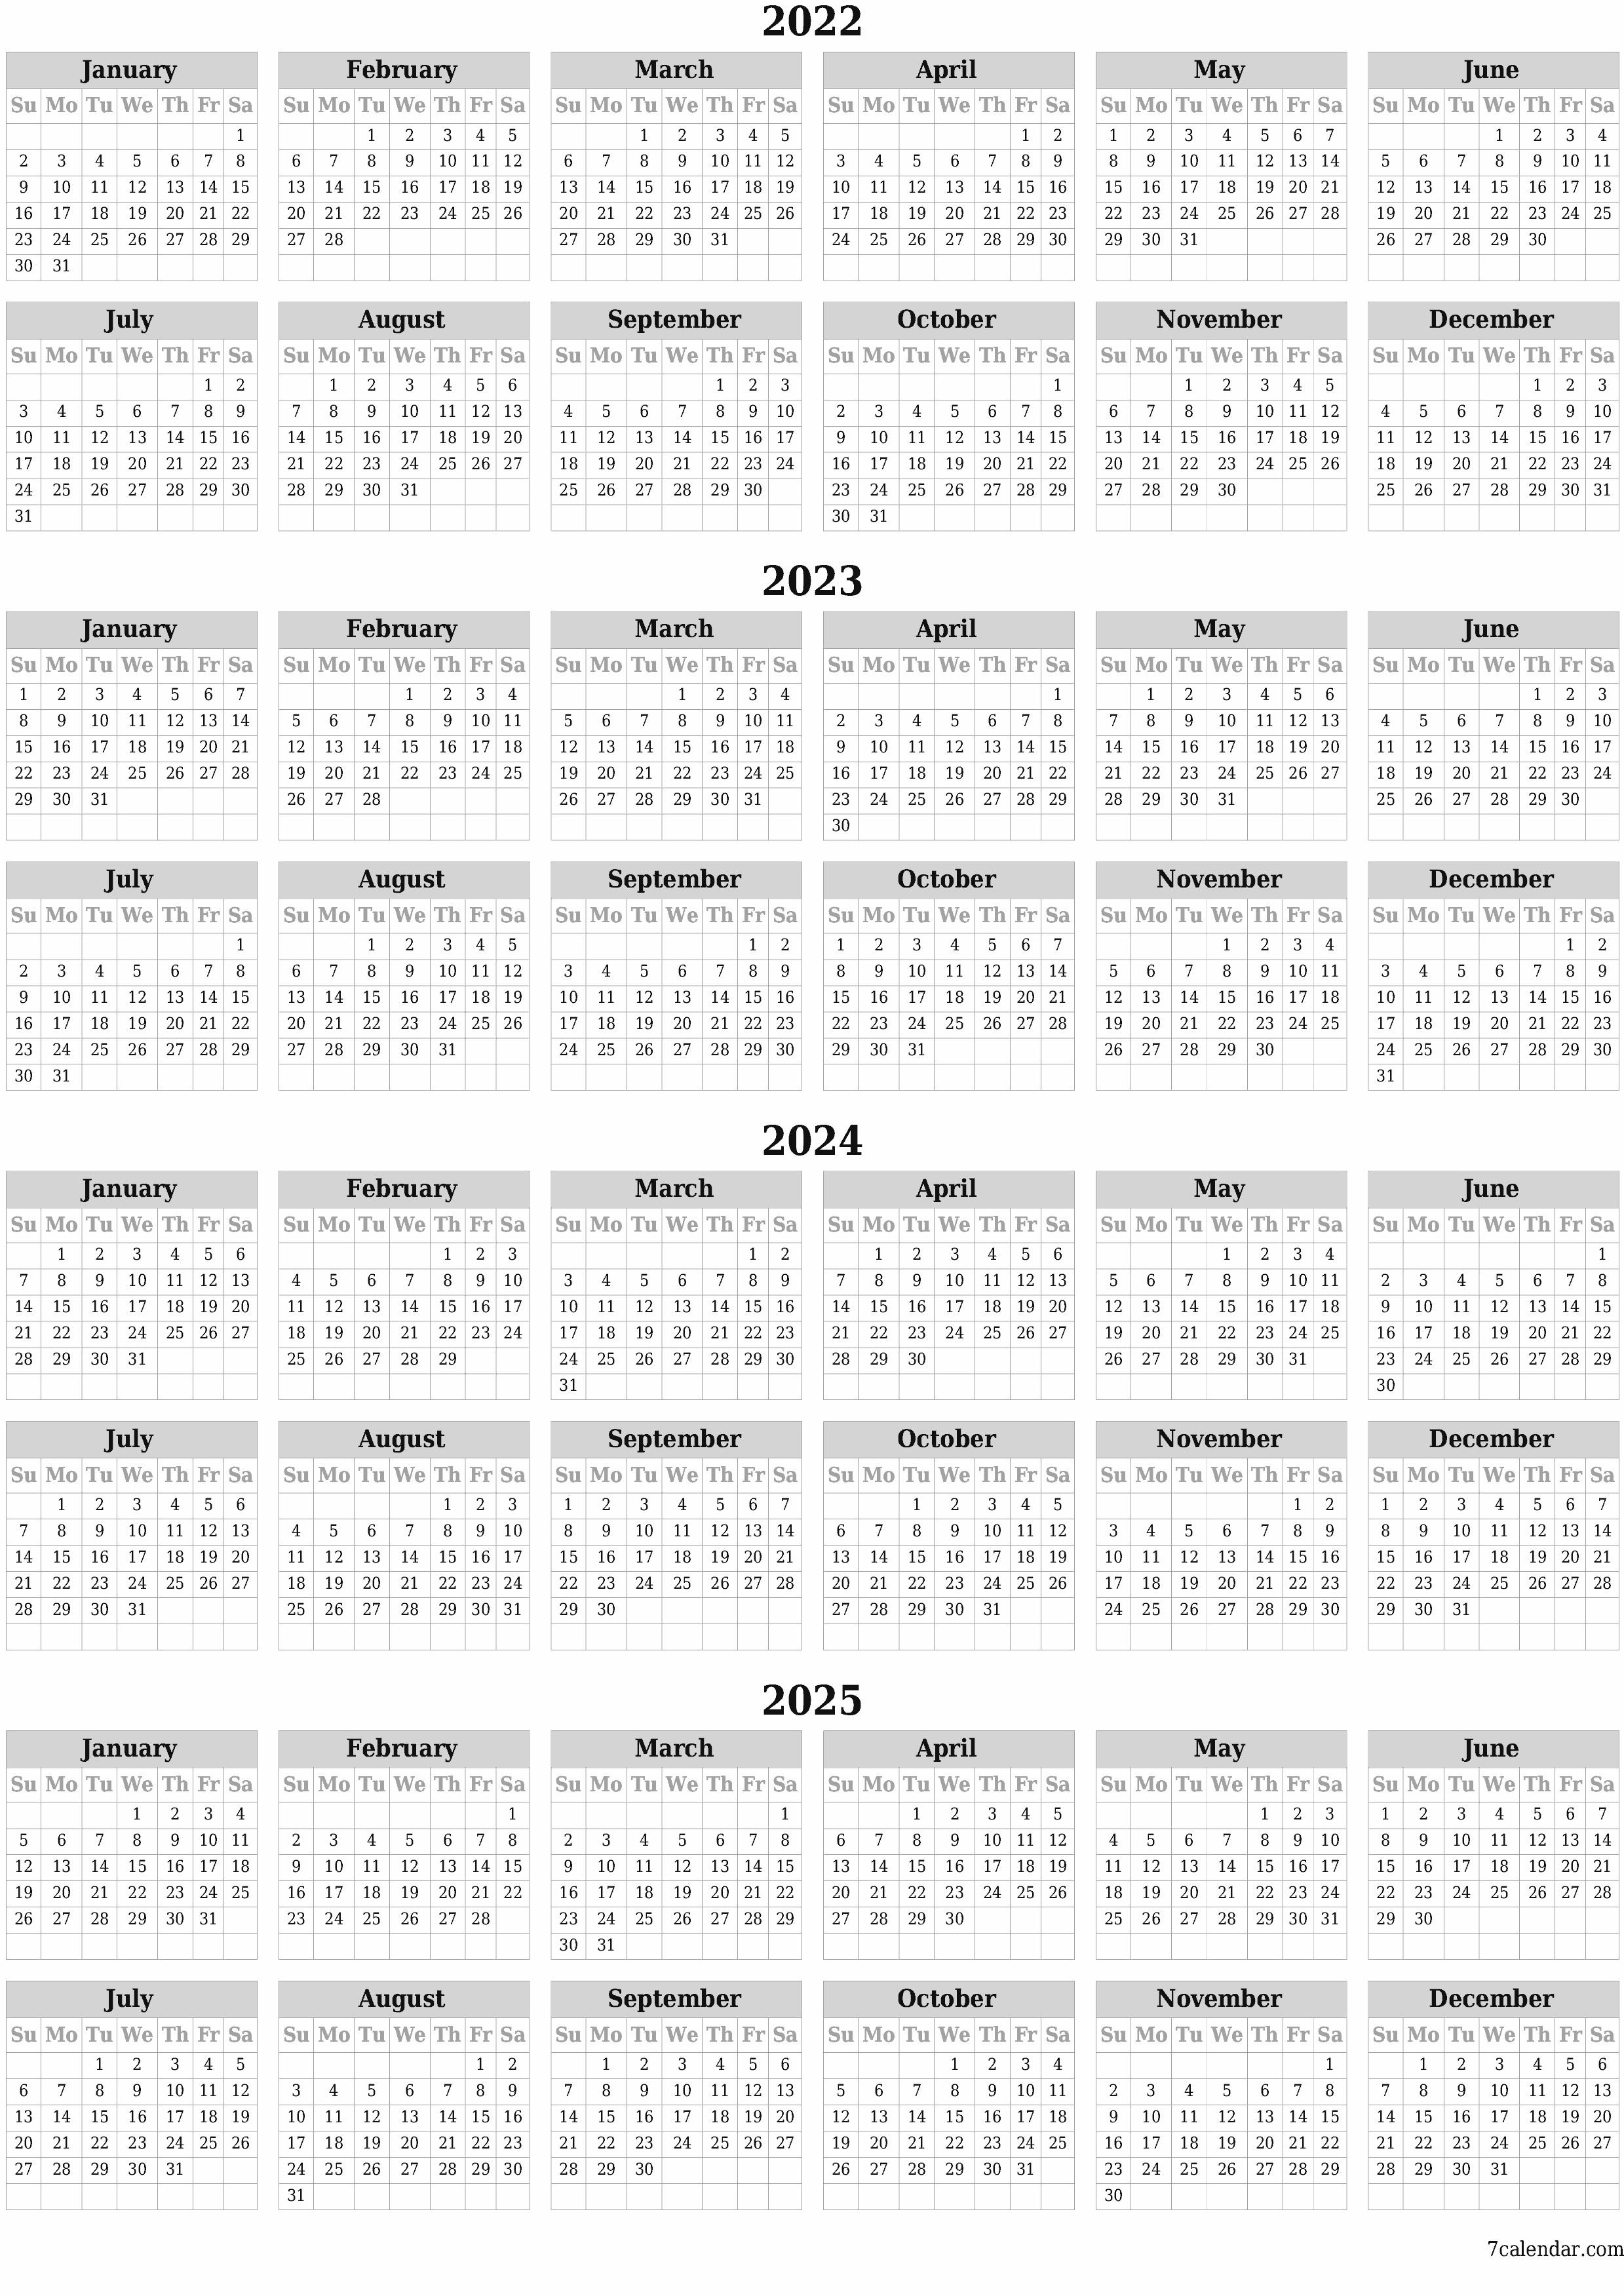 Blank yearly dated HD template image of calendar for year 2022, 2023, 2024, 2025 save and print to PDF PNG English - 7calendar.com